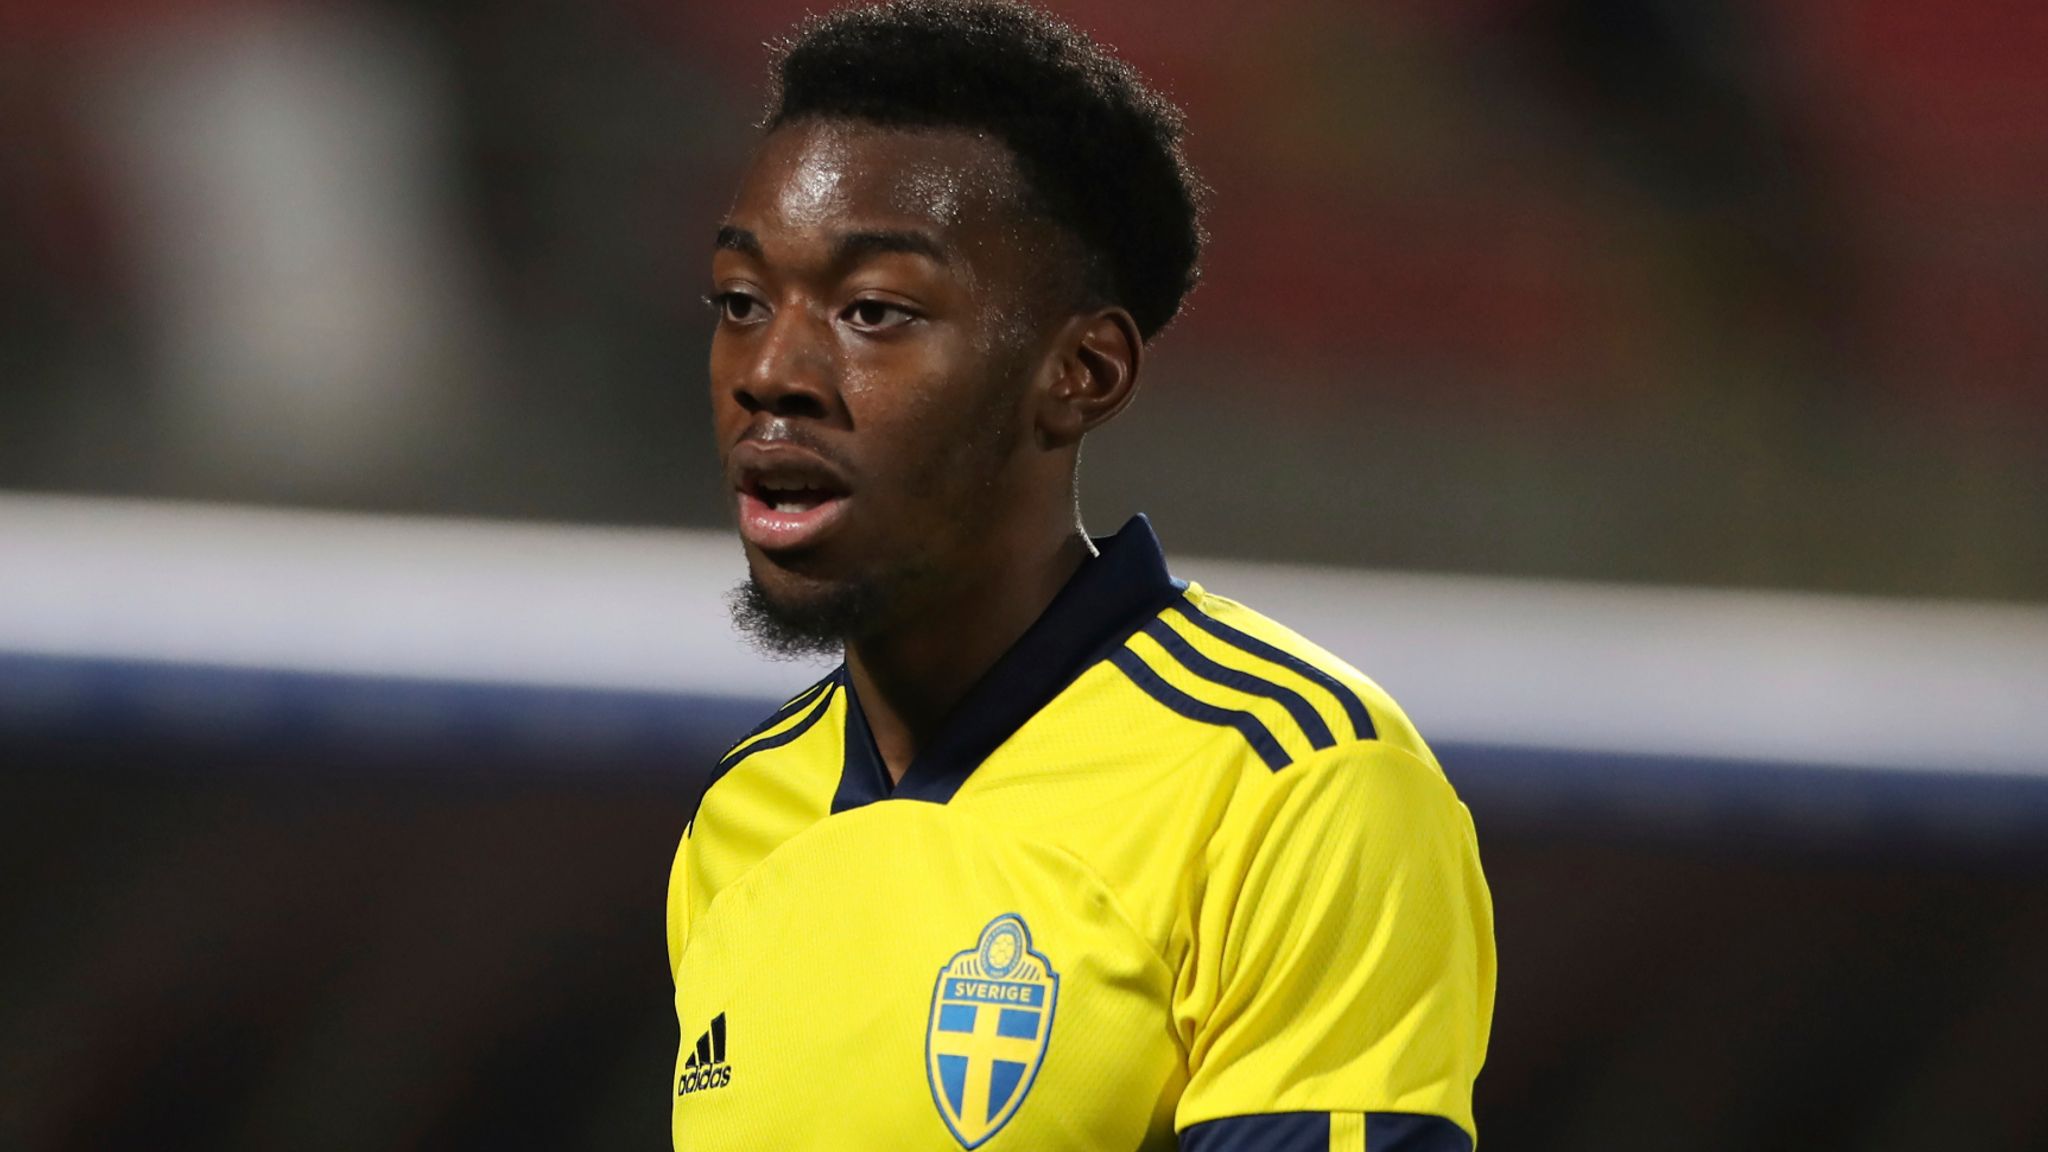 Manchester United's Anthony Elanga says he was racially abused while playing for Sweden U21s in Italy - Football News - Sky Sports